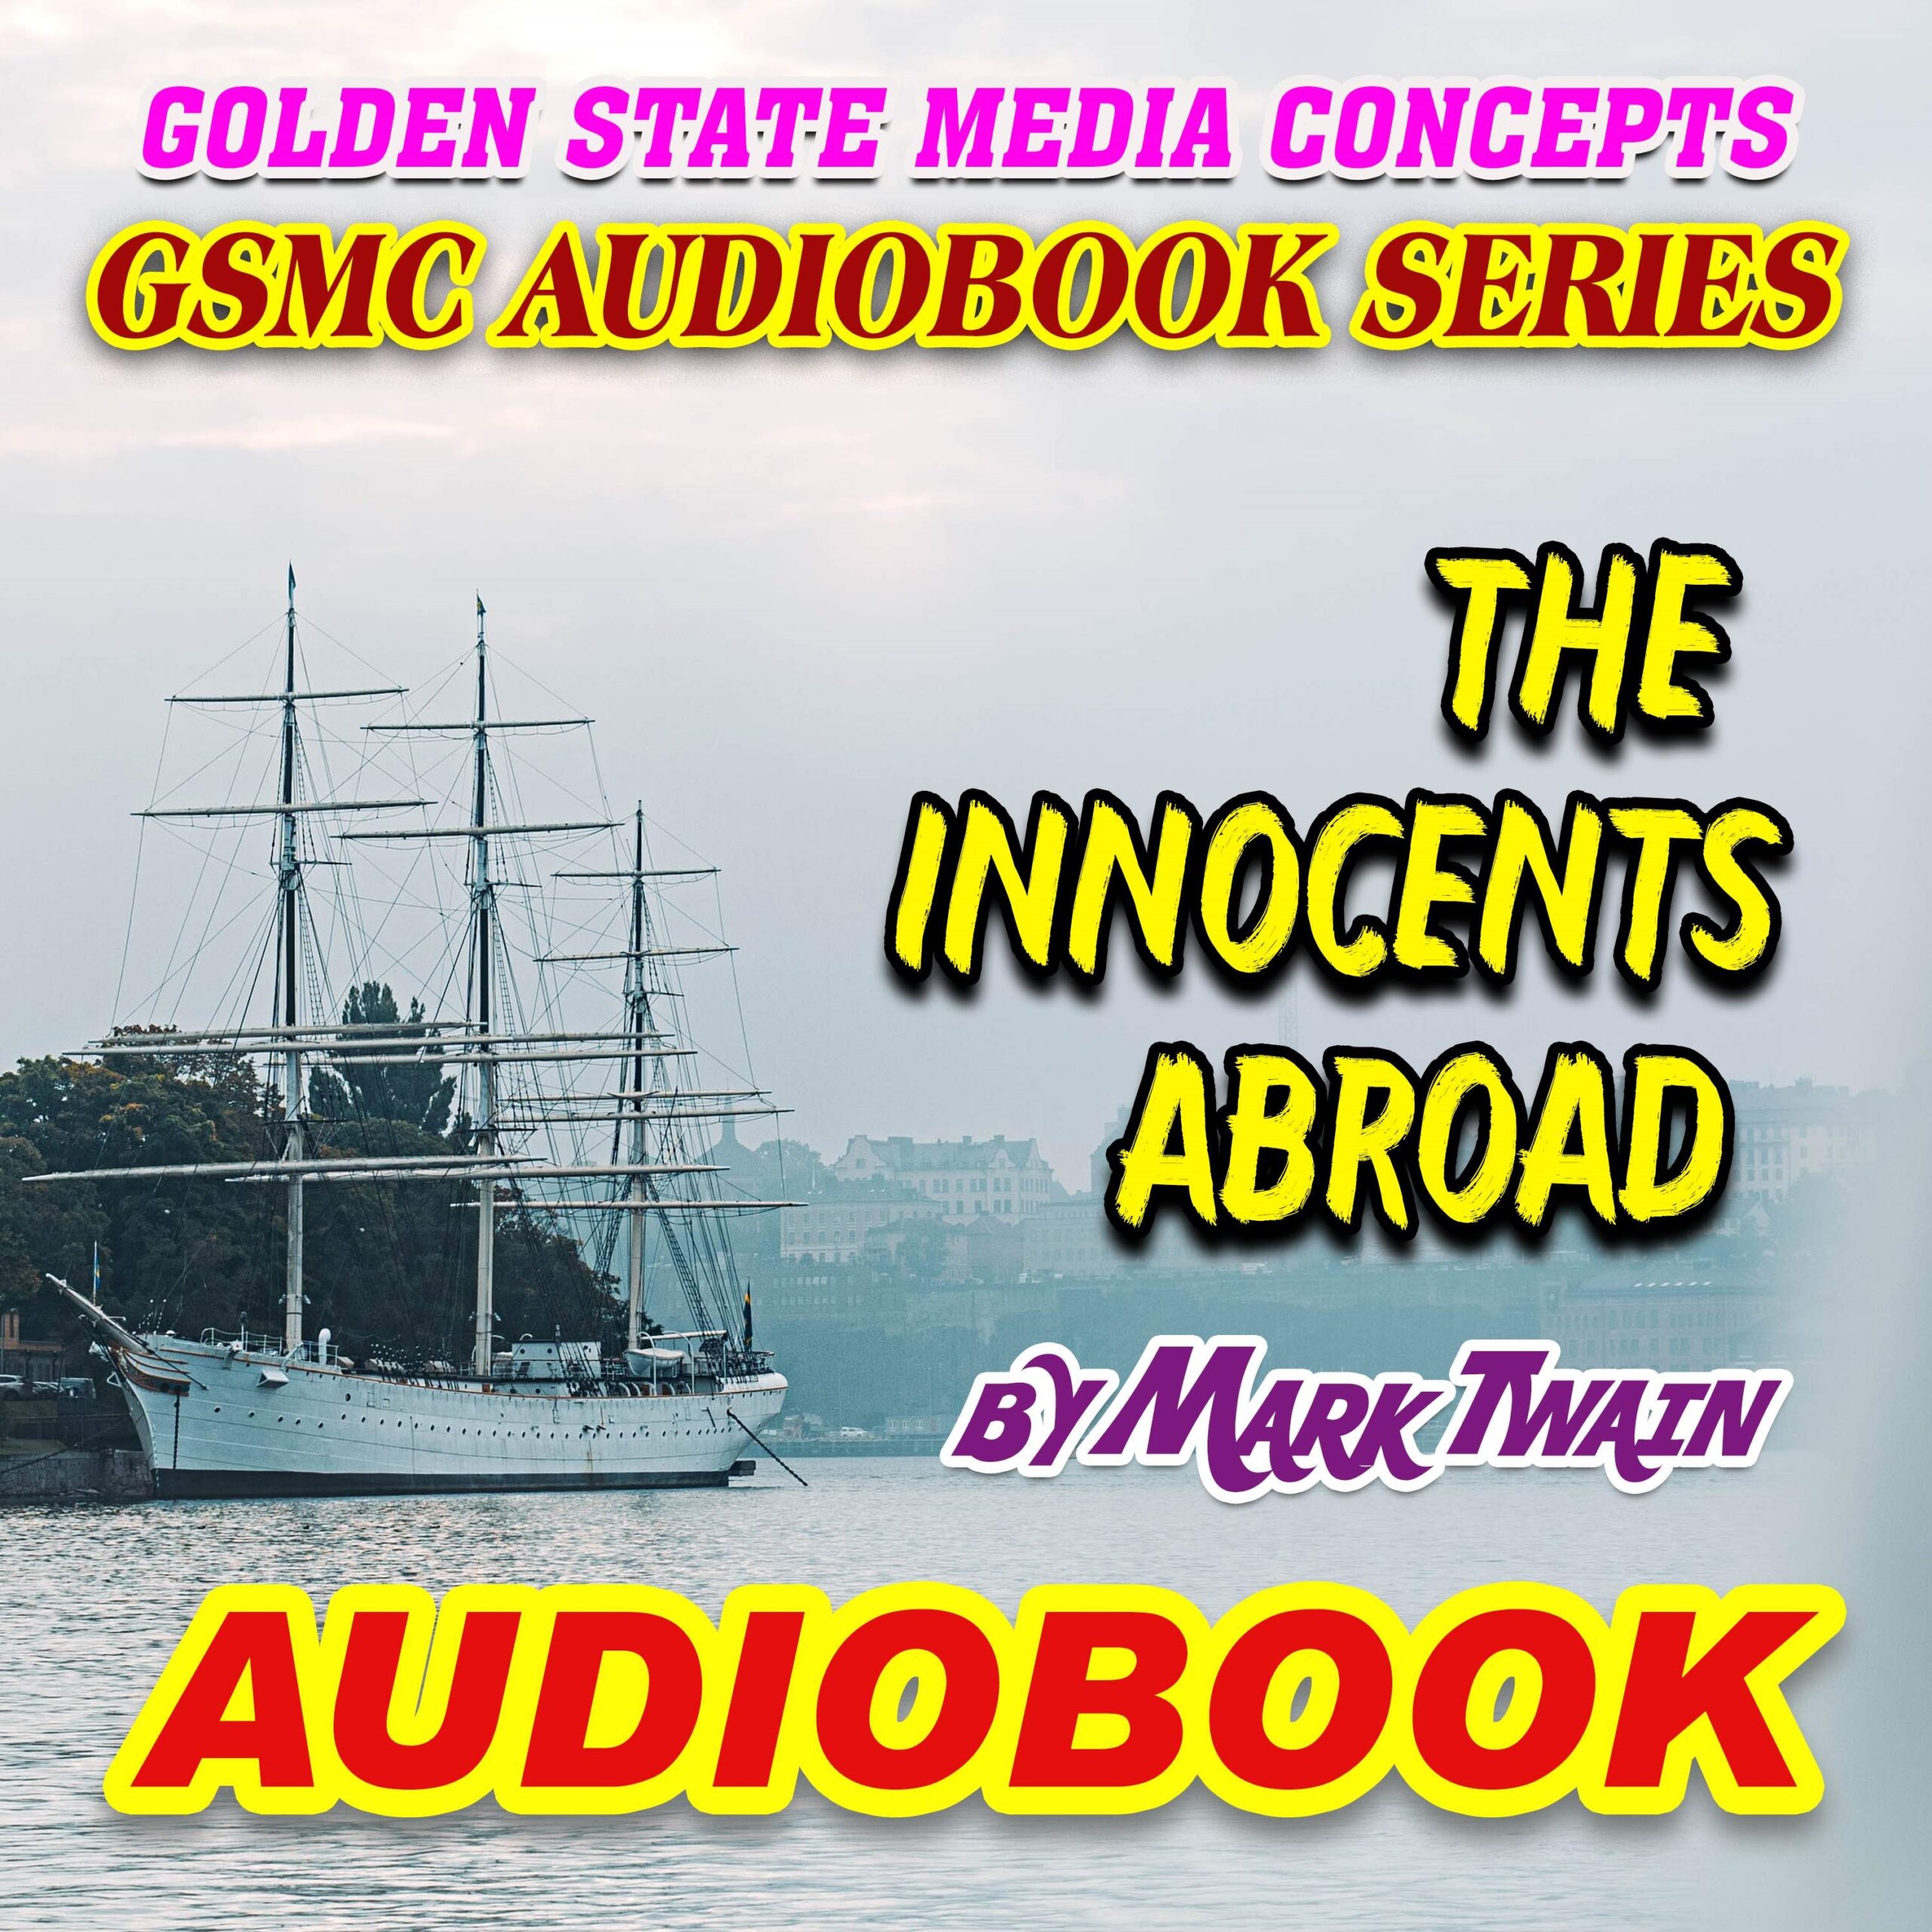 GSMC Audiobook Series: The Innocents Abroad